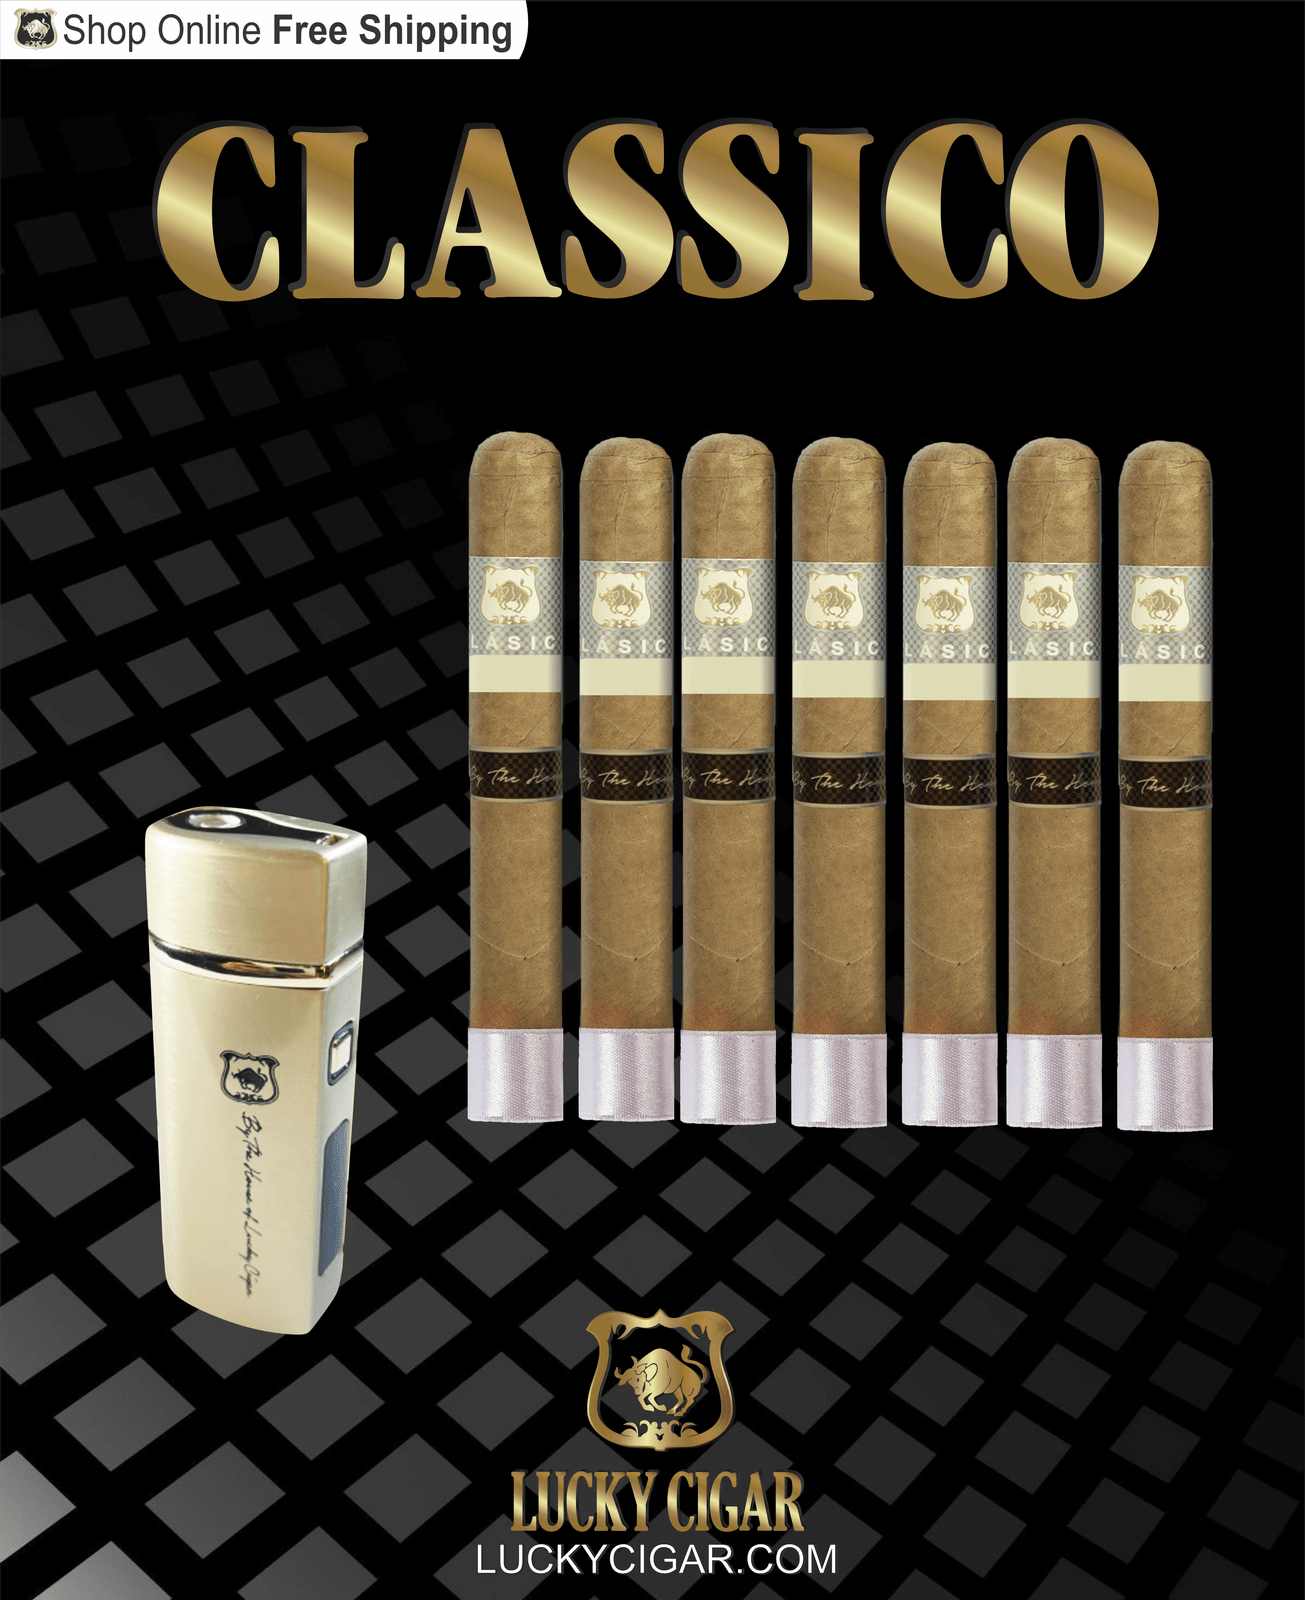 Lucky Cigar Sampler Sets: Set of 7 Classico Toro Cigars with Torch